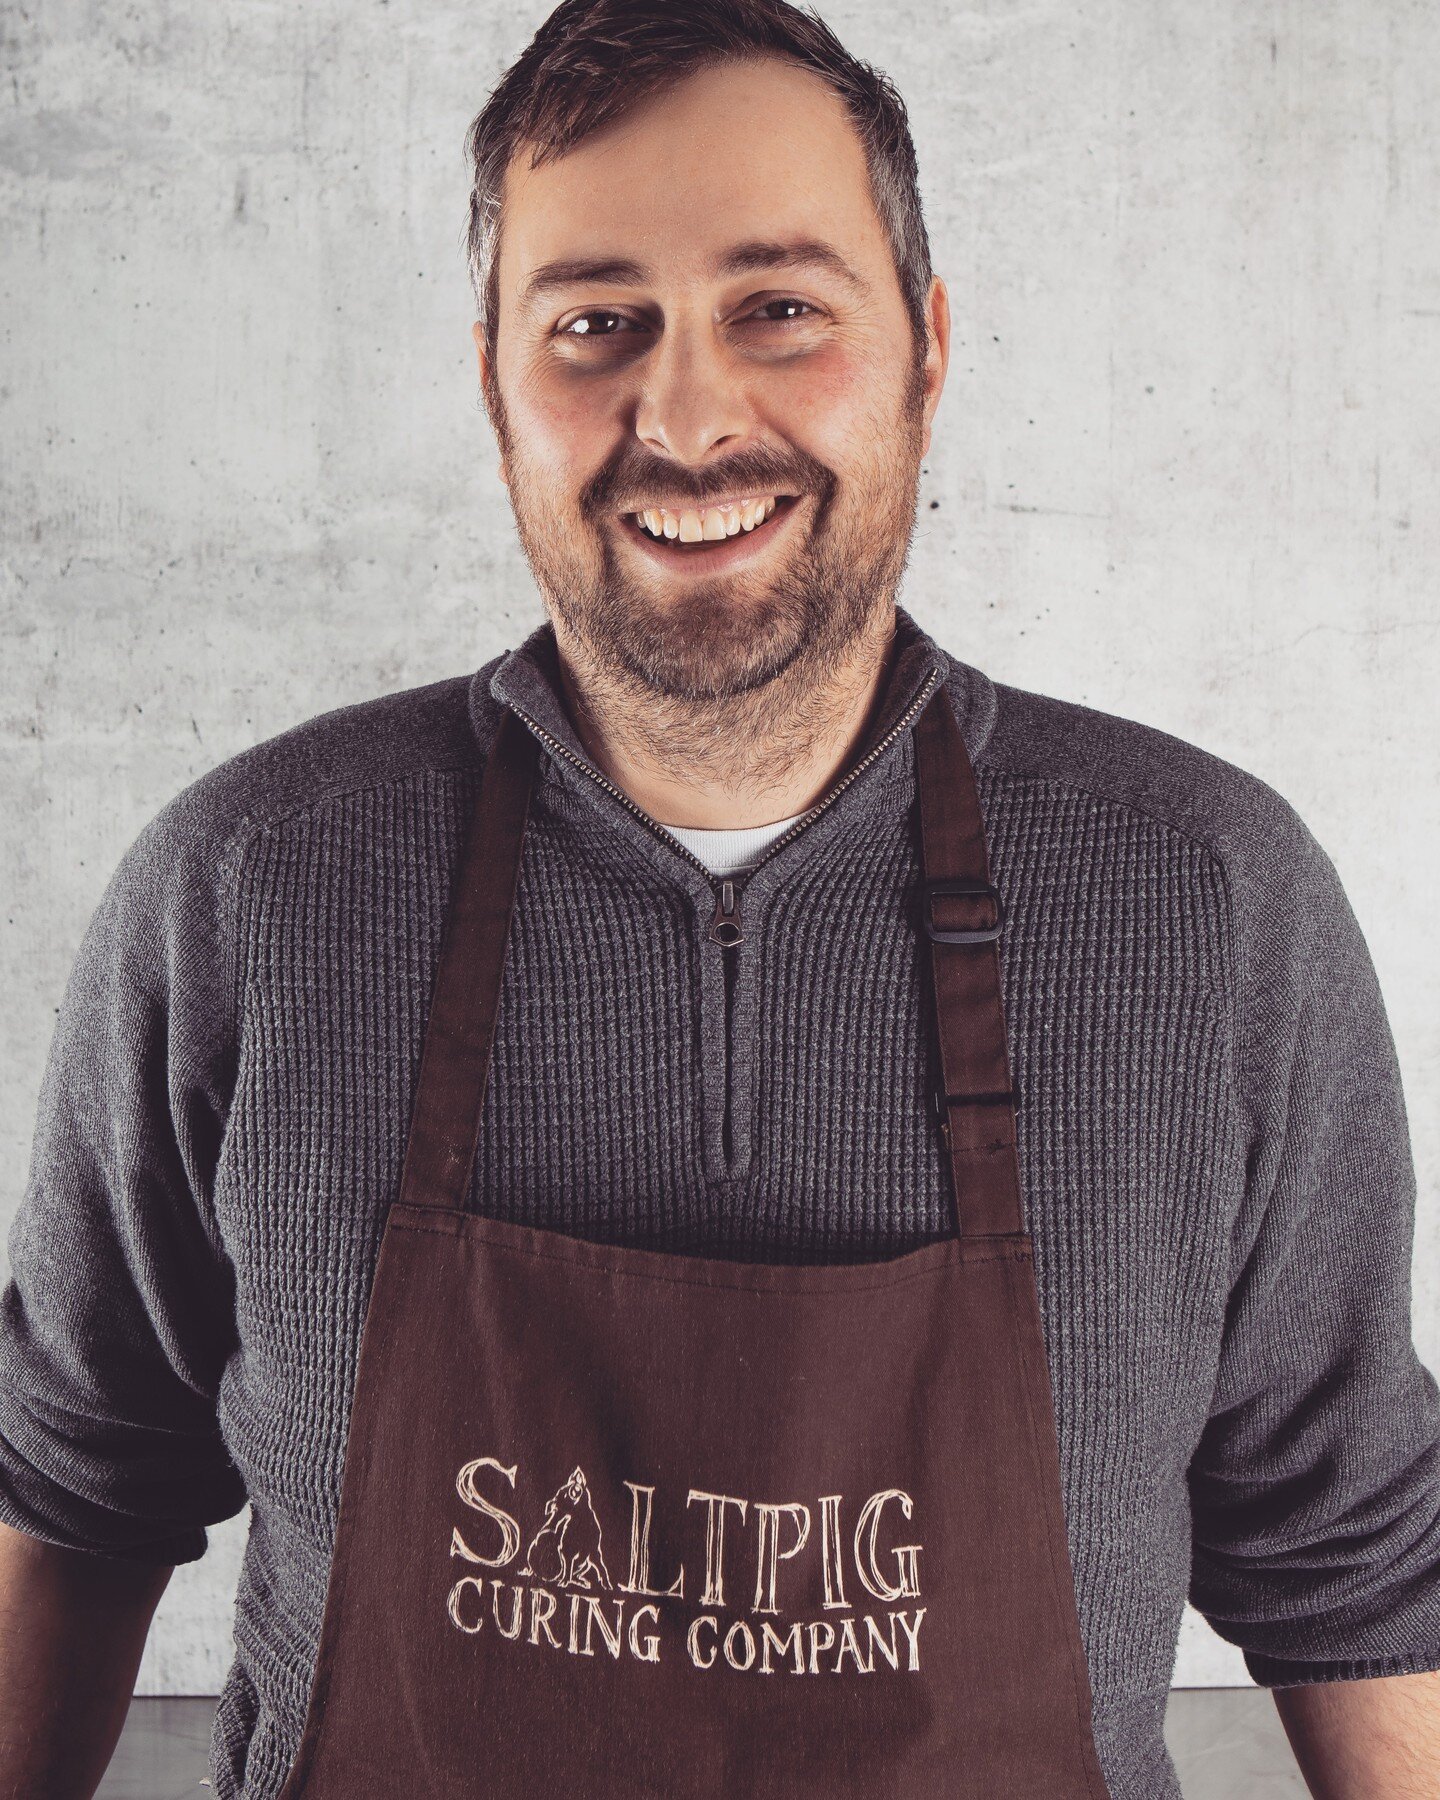 Supplier Showcase Blog: SaltPig Curing

This month we speak to another of our favourite suppliers of world class British charcuterie; Ben Dulley from @saltpigcuring 

SaltPig produce an amazing selection of well considered cured meats and salamis wit